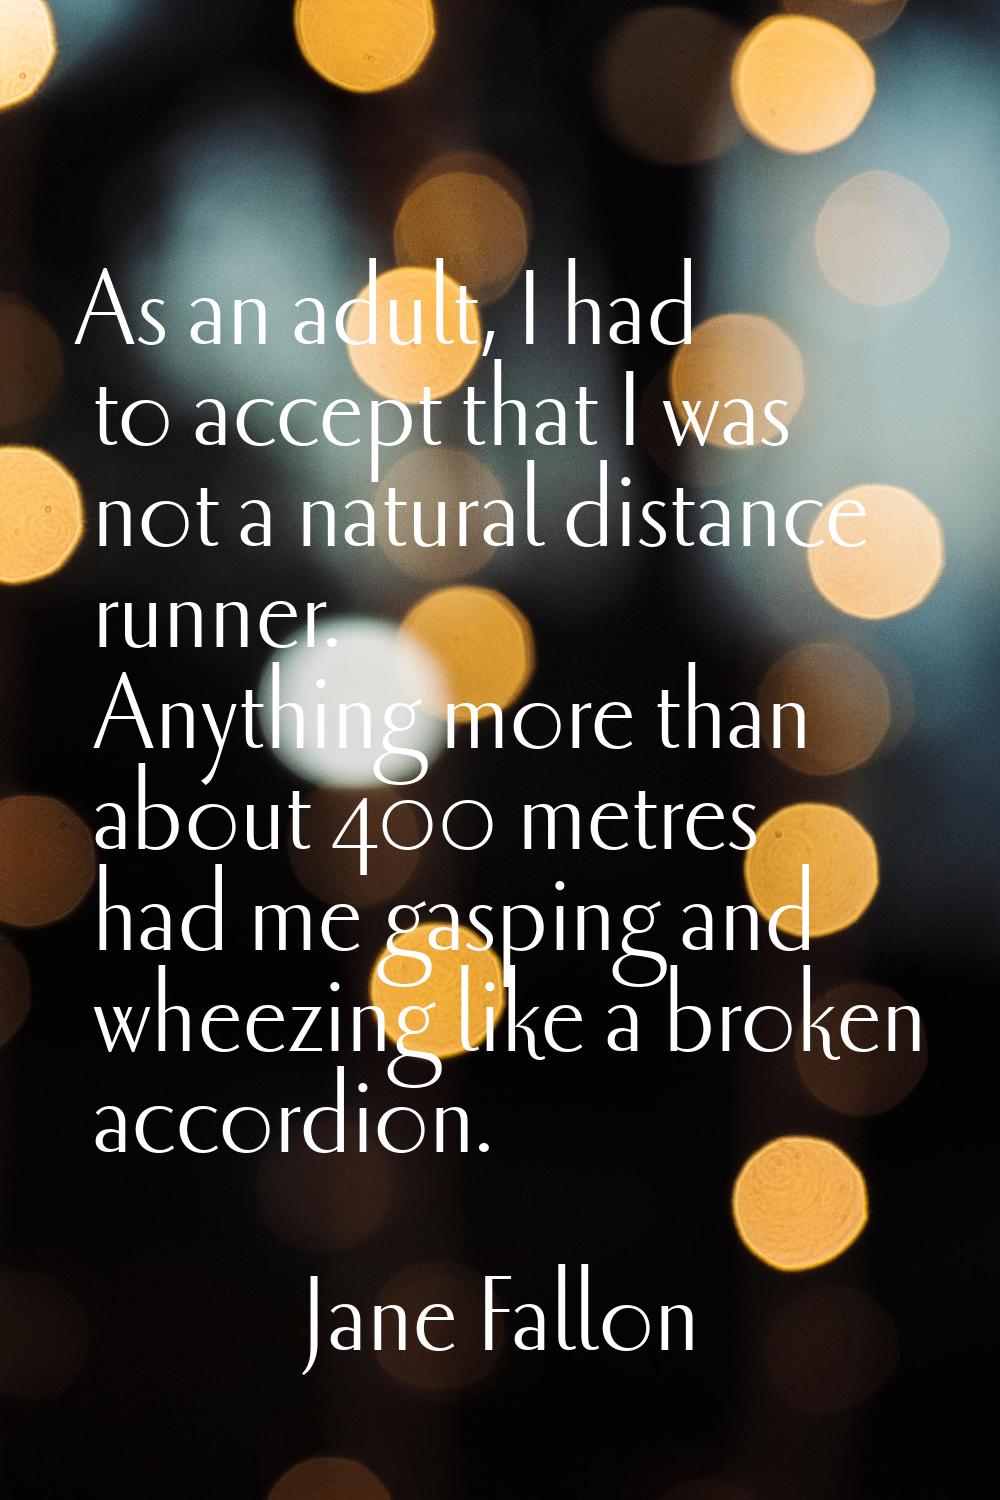 As an adult, I had to accept that I was not a natural distance runner. Anything more than about 400